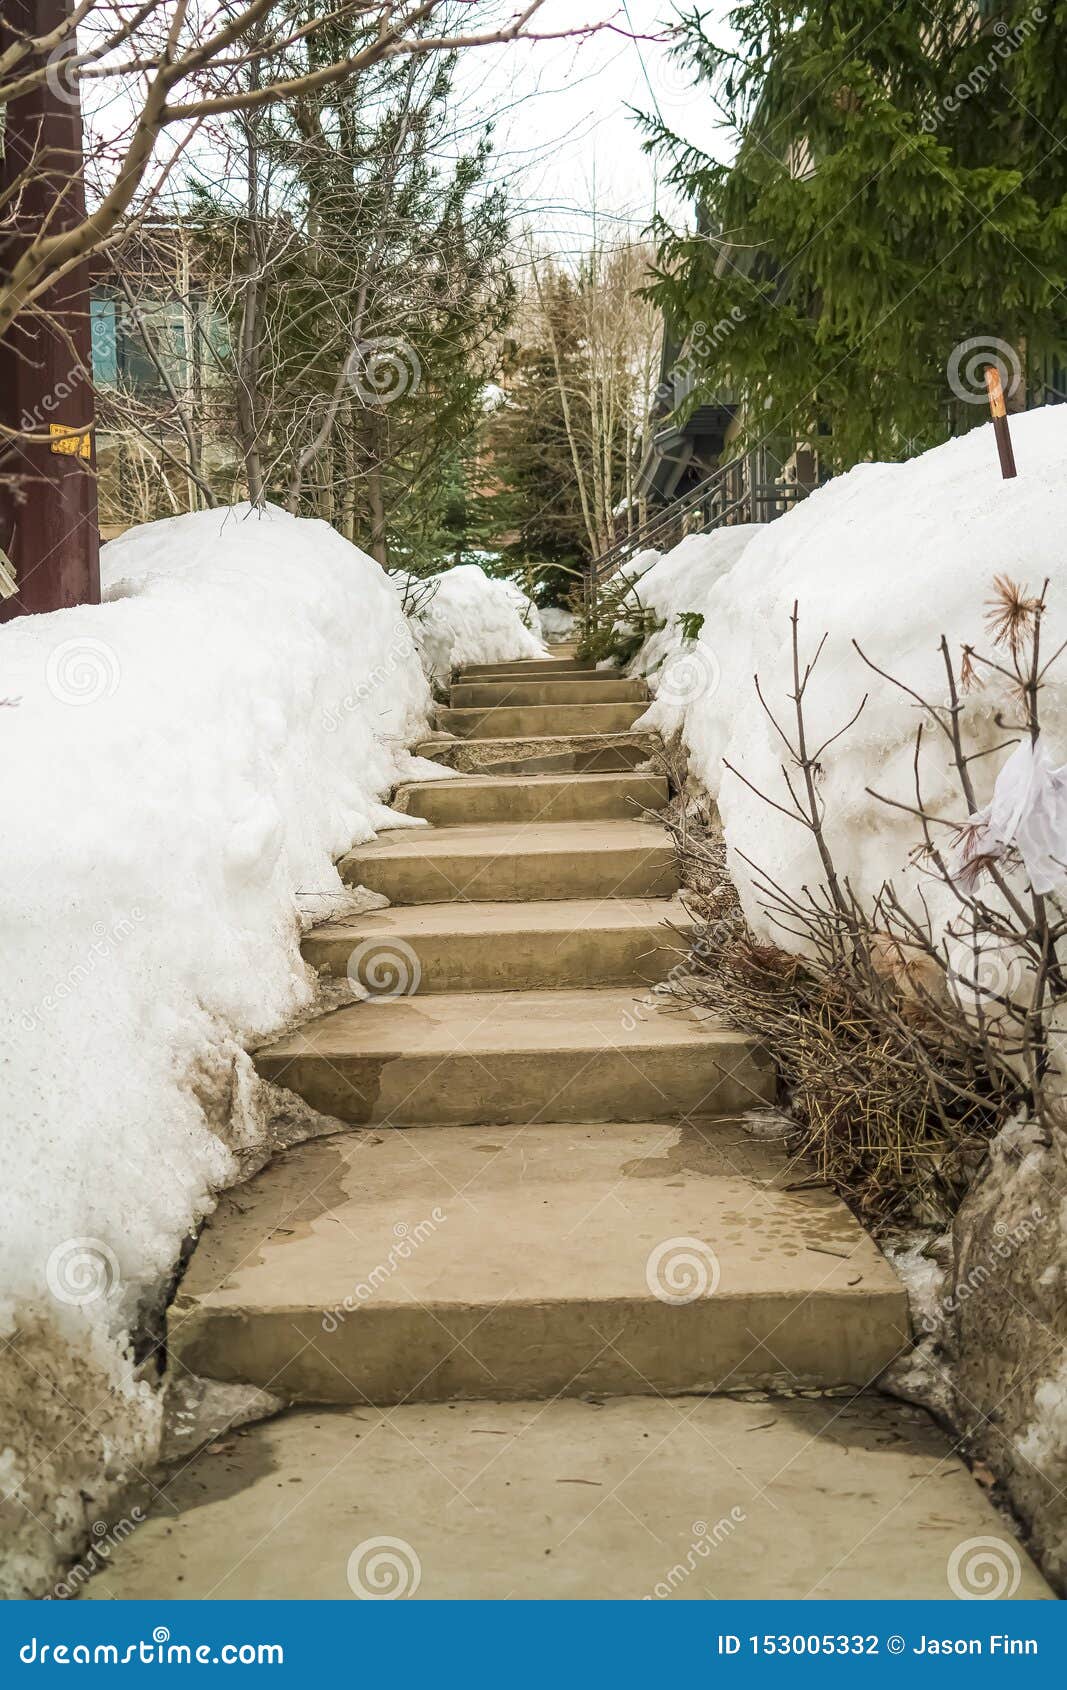 Weathered Concerete Outdoor Steps Amid Snow Covered Slope in Winter